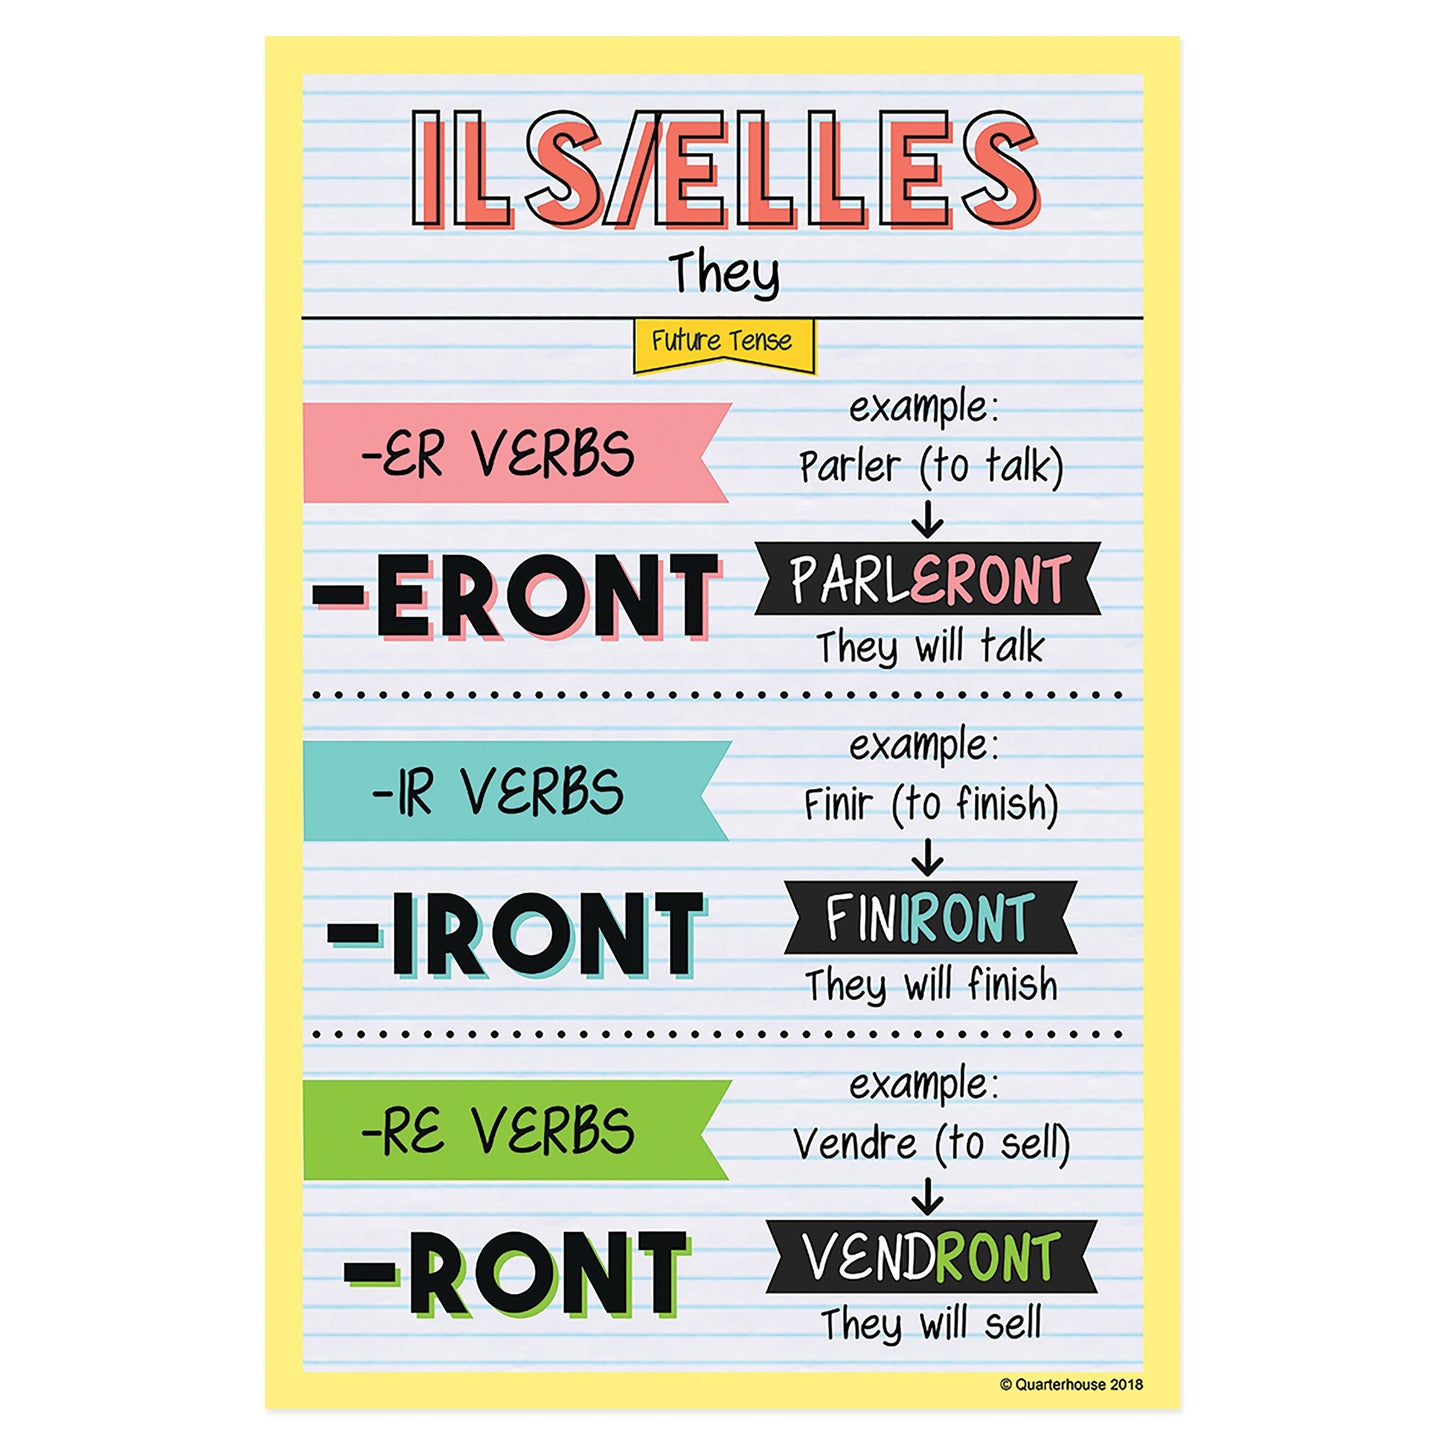 Quarterhouse Ils/Elles - Future Tense French Verb Conjugation Poster, French and ESL Classroom Materials for Teachers